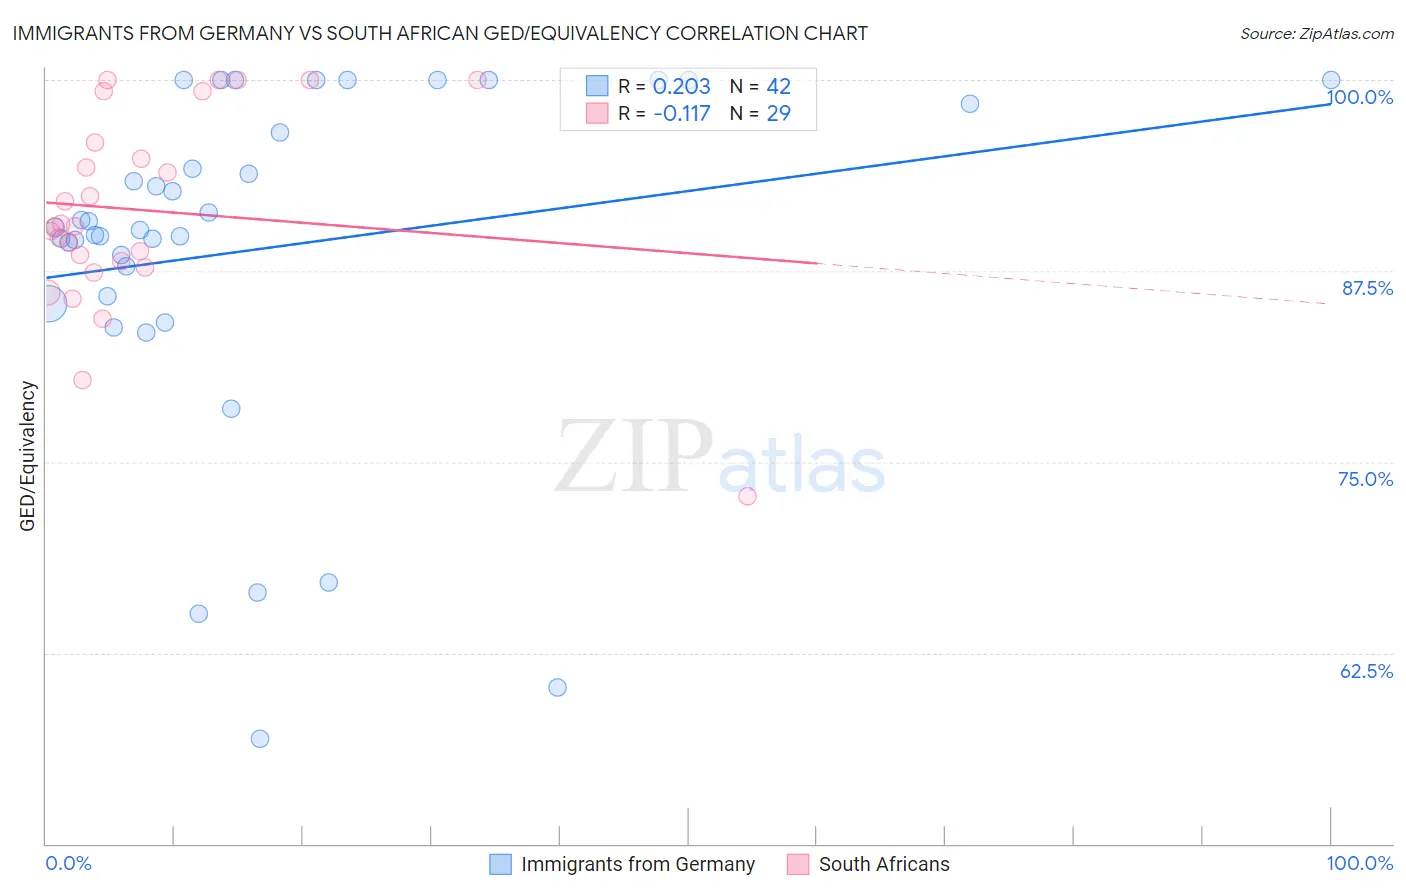 Immigrants from Germany vs South African GED/Equivalency